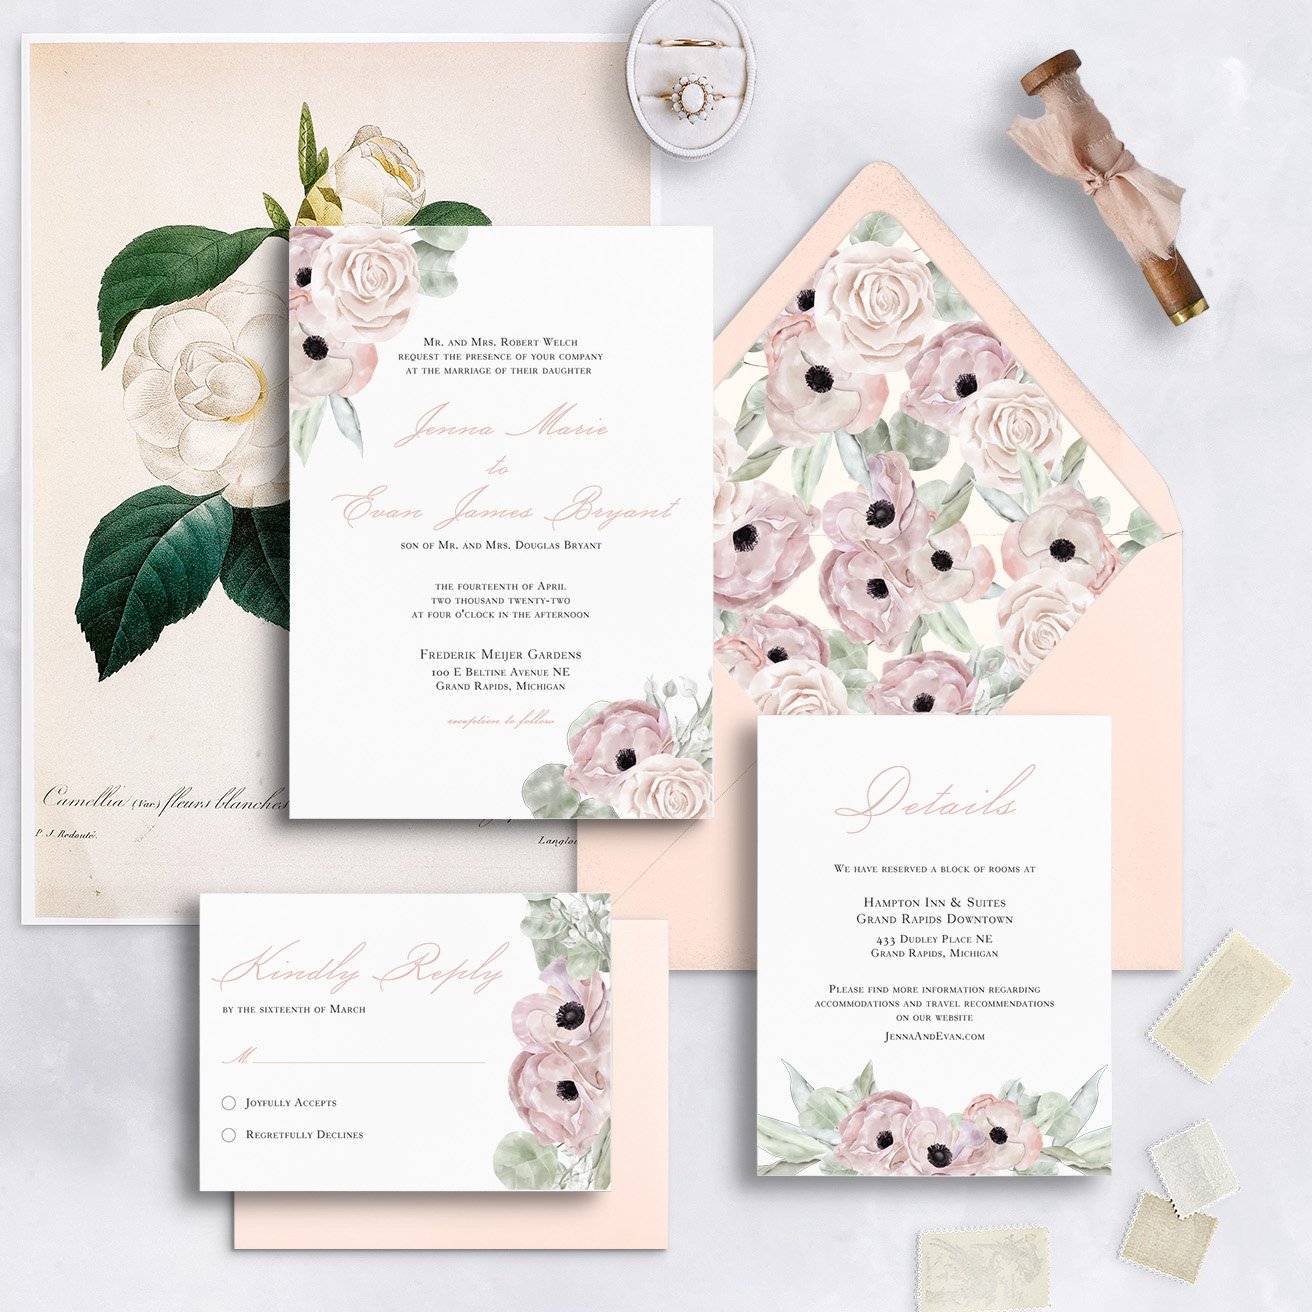 The 2021 Save the Date for Weddings — Cardsmith Design Studio